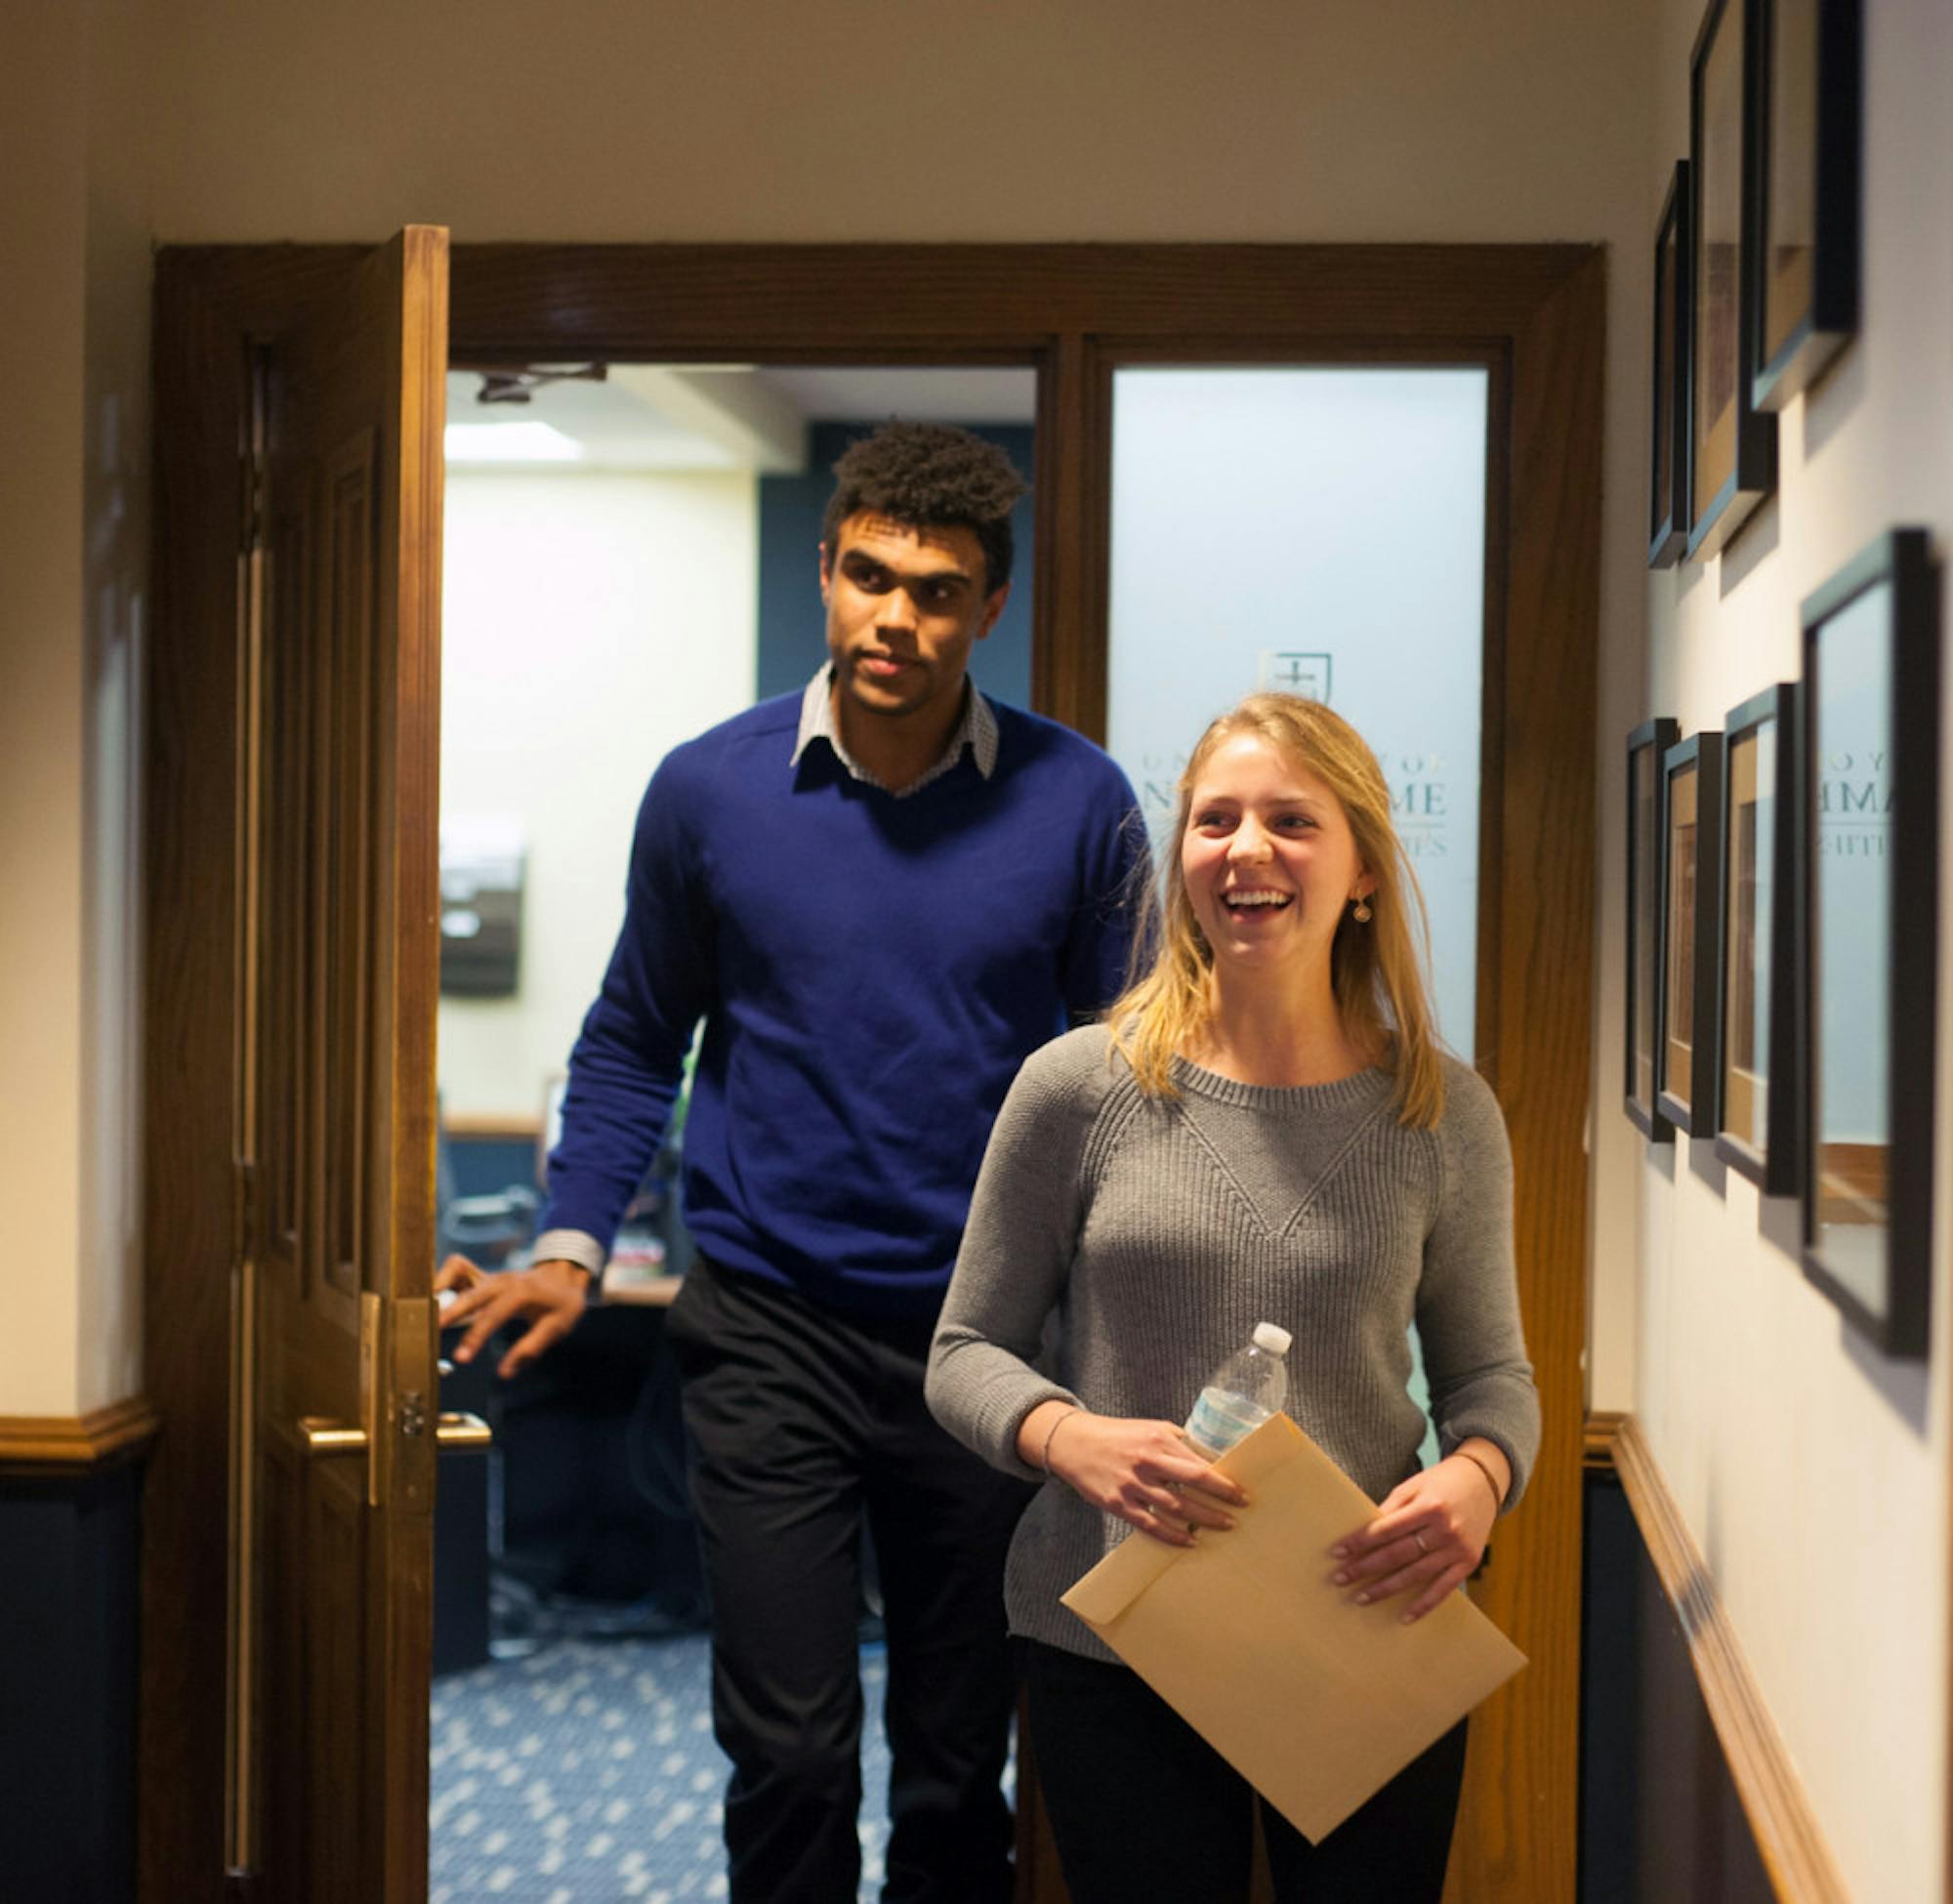 Corey Robinson and Becca Blais emerge from the Judicial Council office after receiving news they had won the student body election for president and vice president.